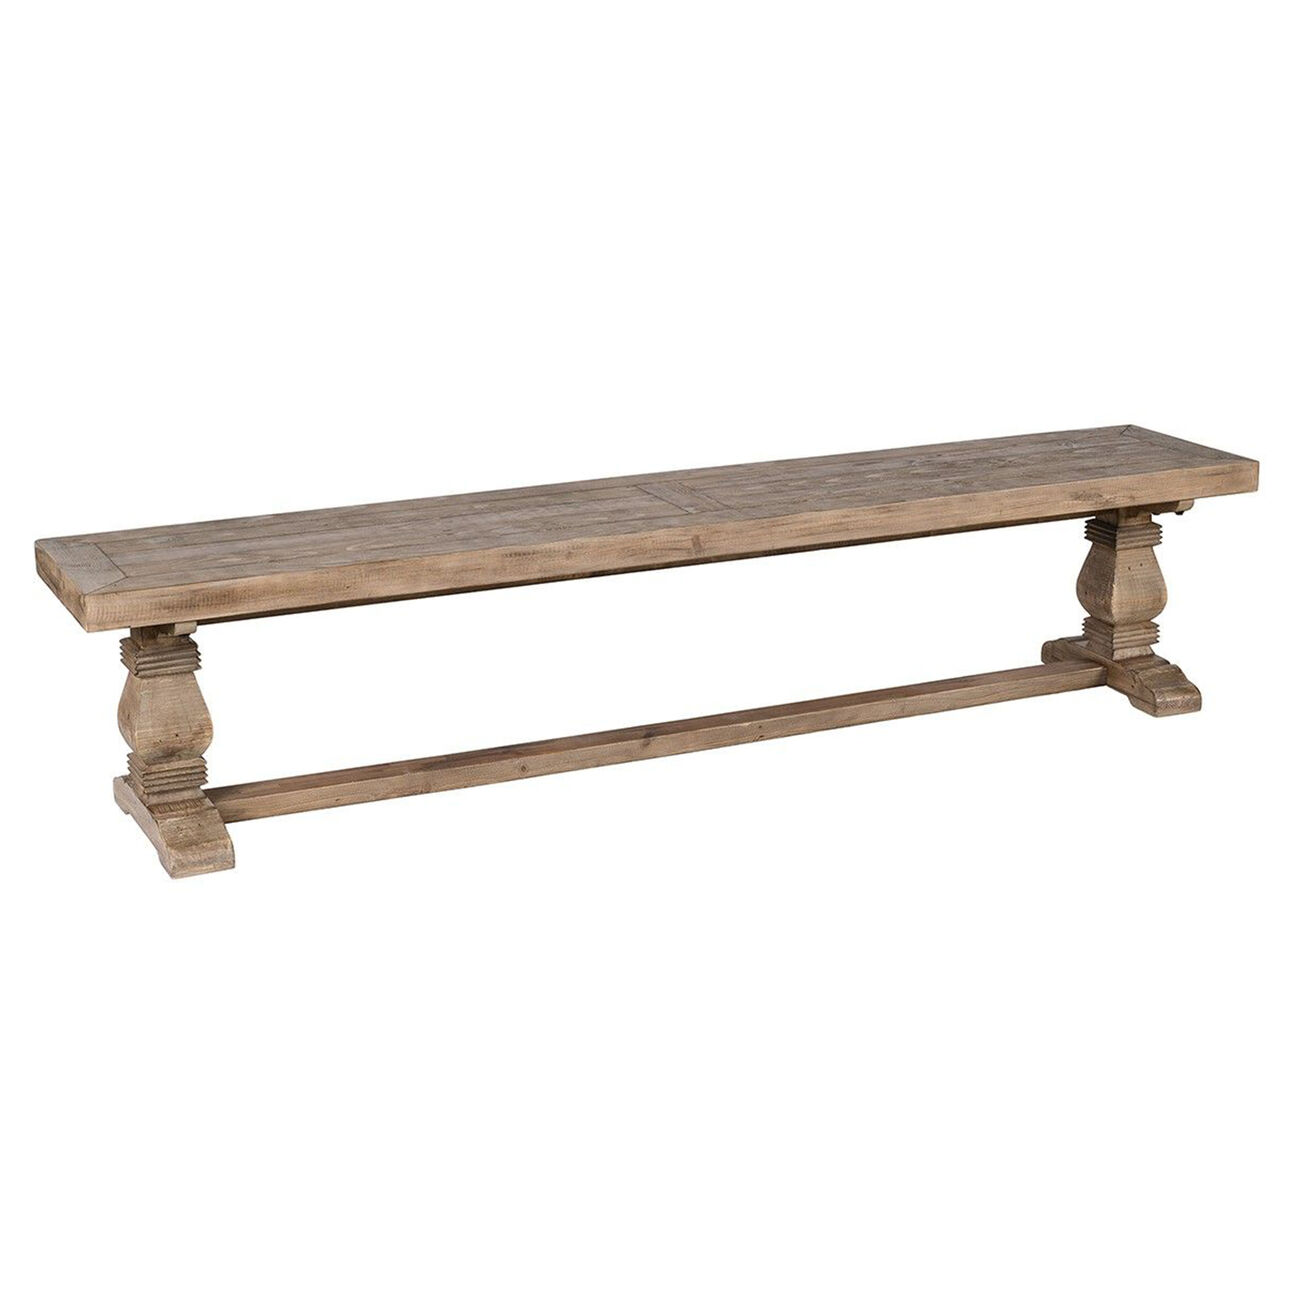 Rectangular Reclaimed Wood Bench with Trestle Base, Weathered Brown